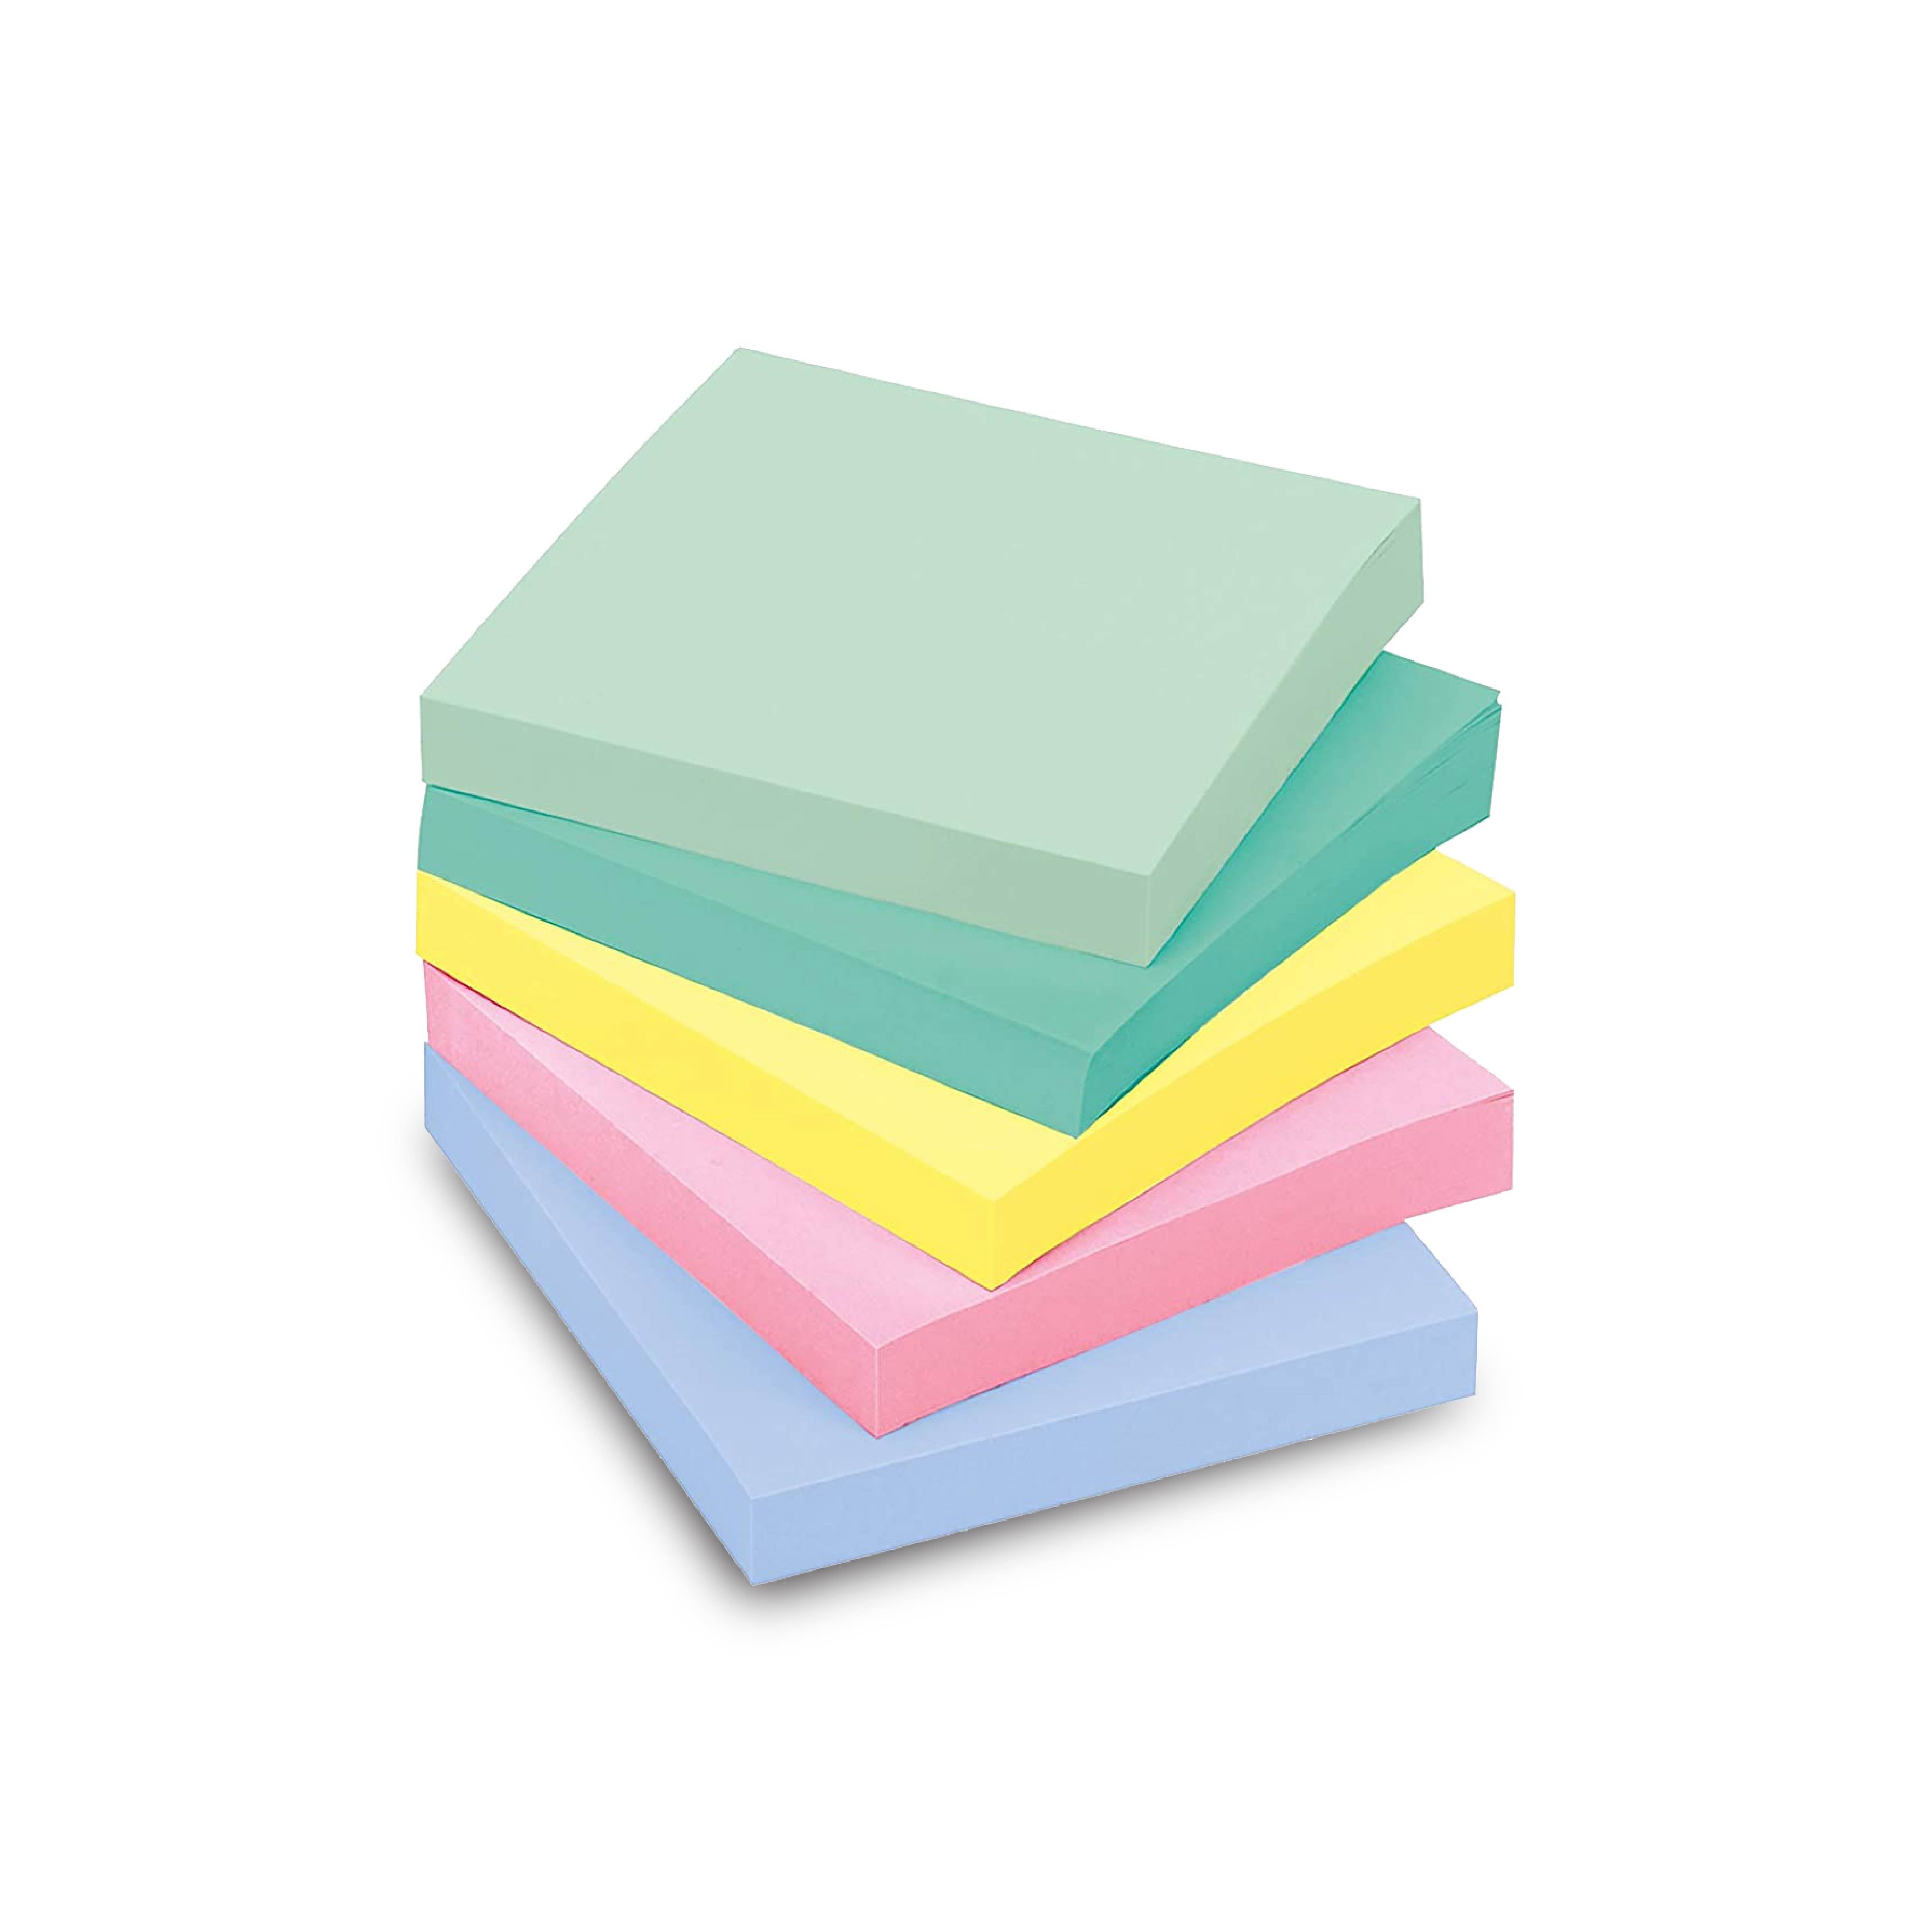 3M Post-It Notes Pastel Pack Of 12 Pads - 3M, CLEANDESK, Notepad, PAPER, SALE